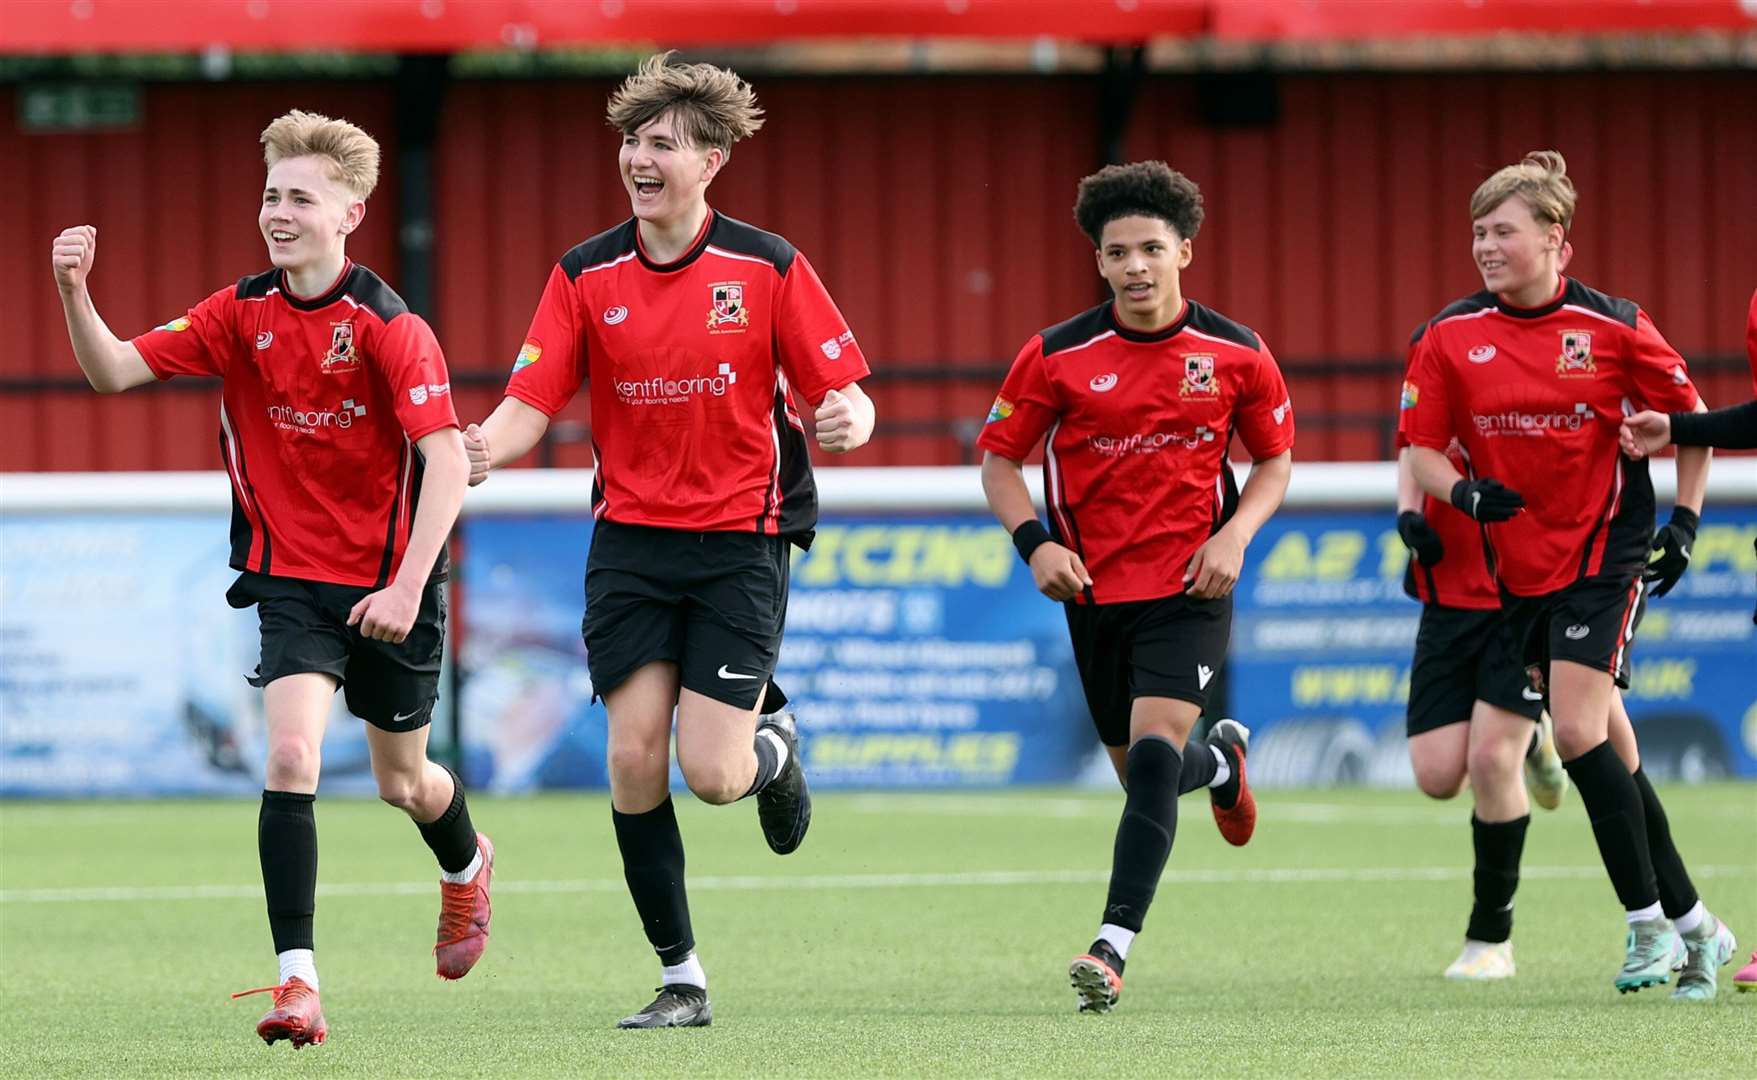 Rochester under-15s celebrate a goal against Ebbsfleet. Picture: PSP Images